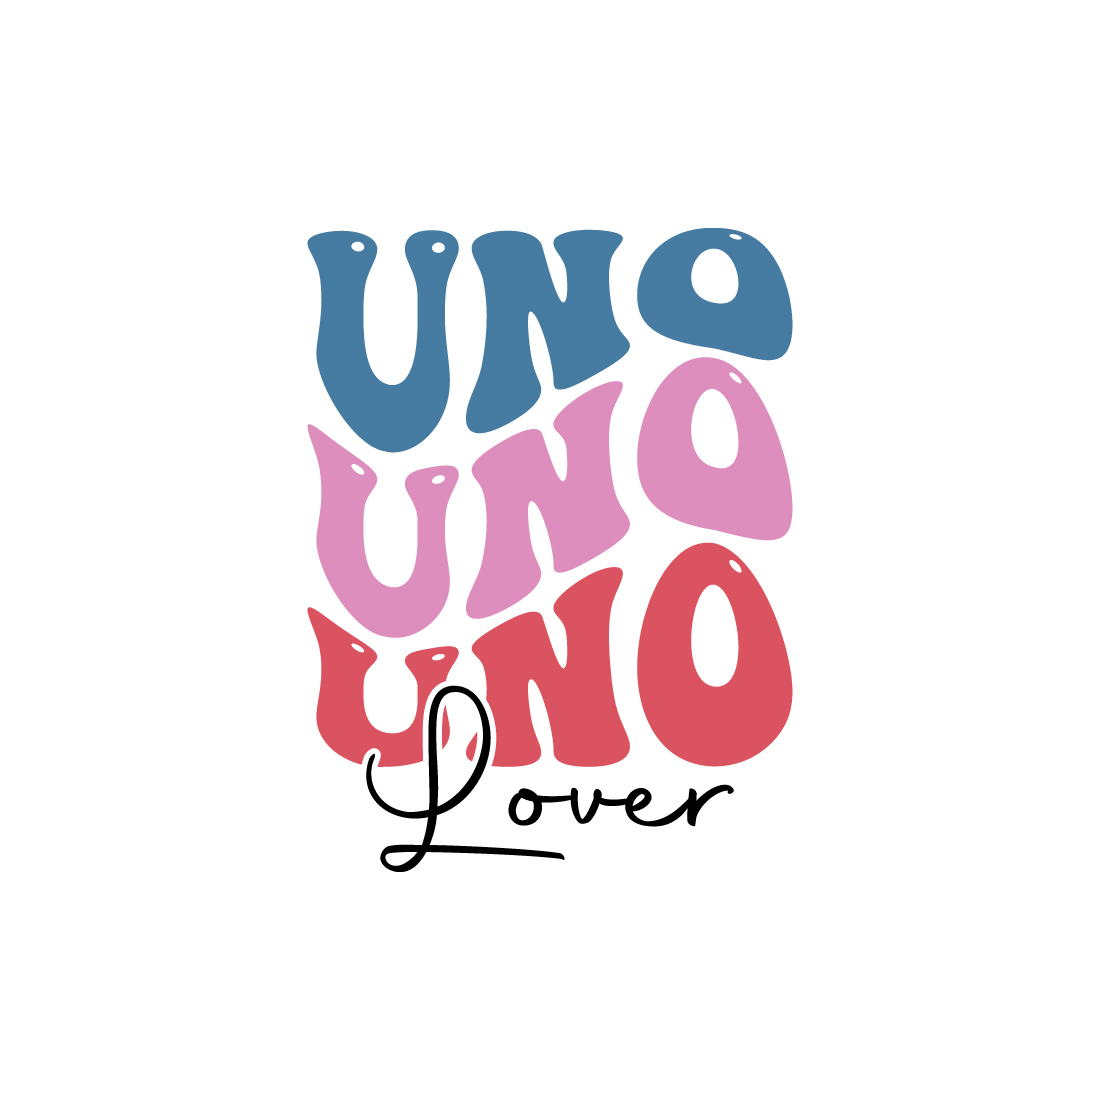 Uno lover indoor game retro typography design for t-shirts, cards, frame artwork, phone cases, bags, mugs, stickers, tumblers, print, etc preview image.